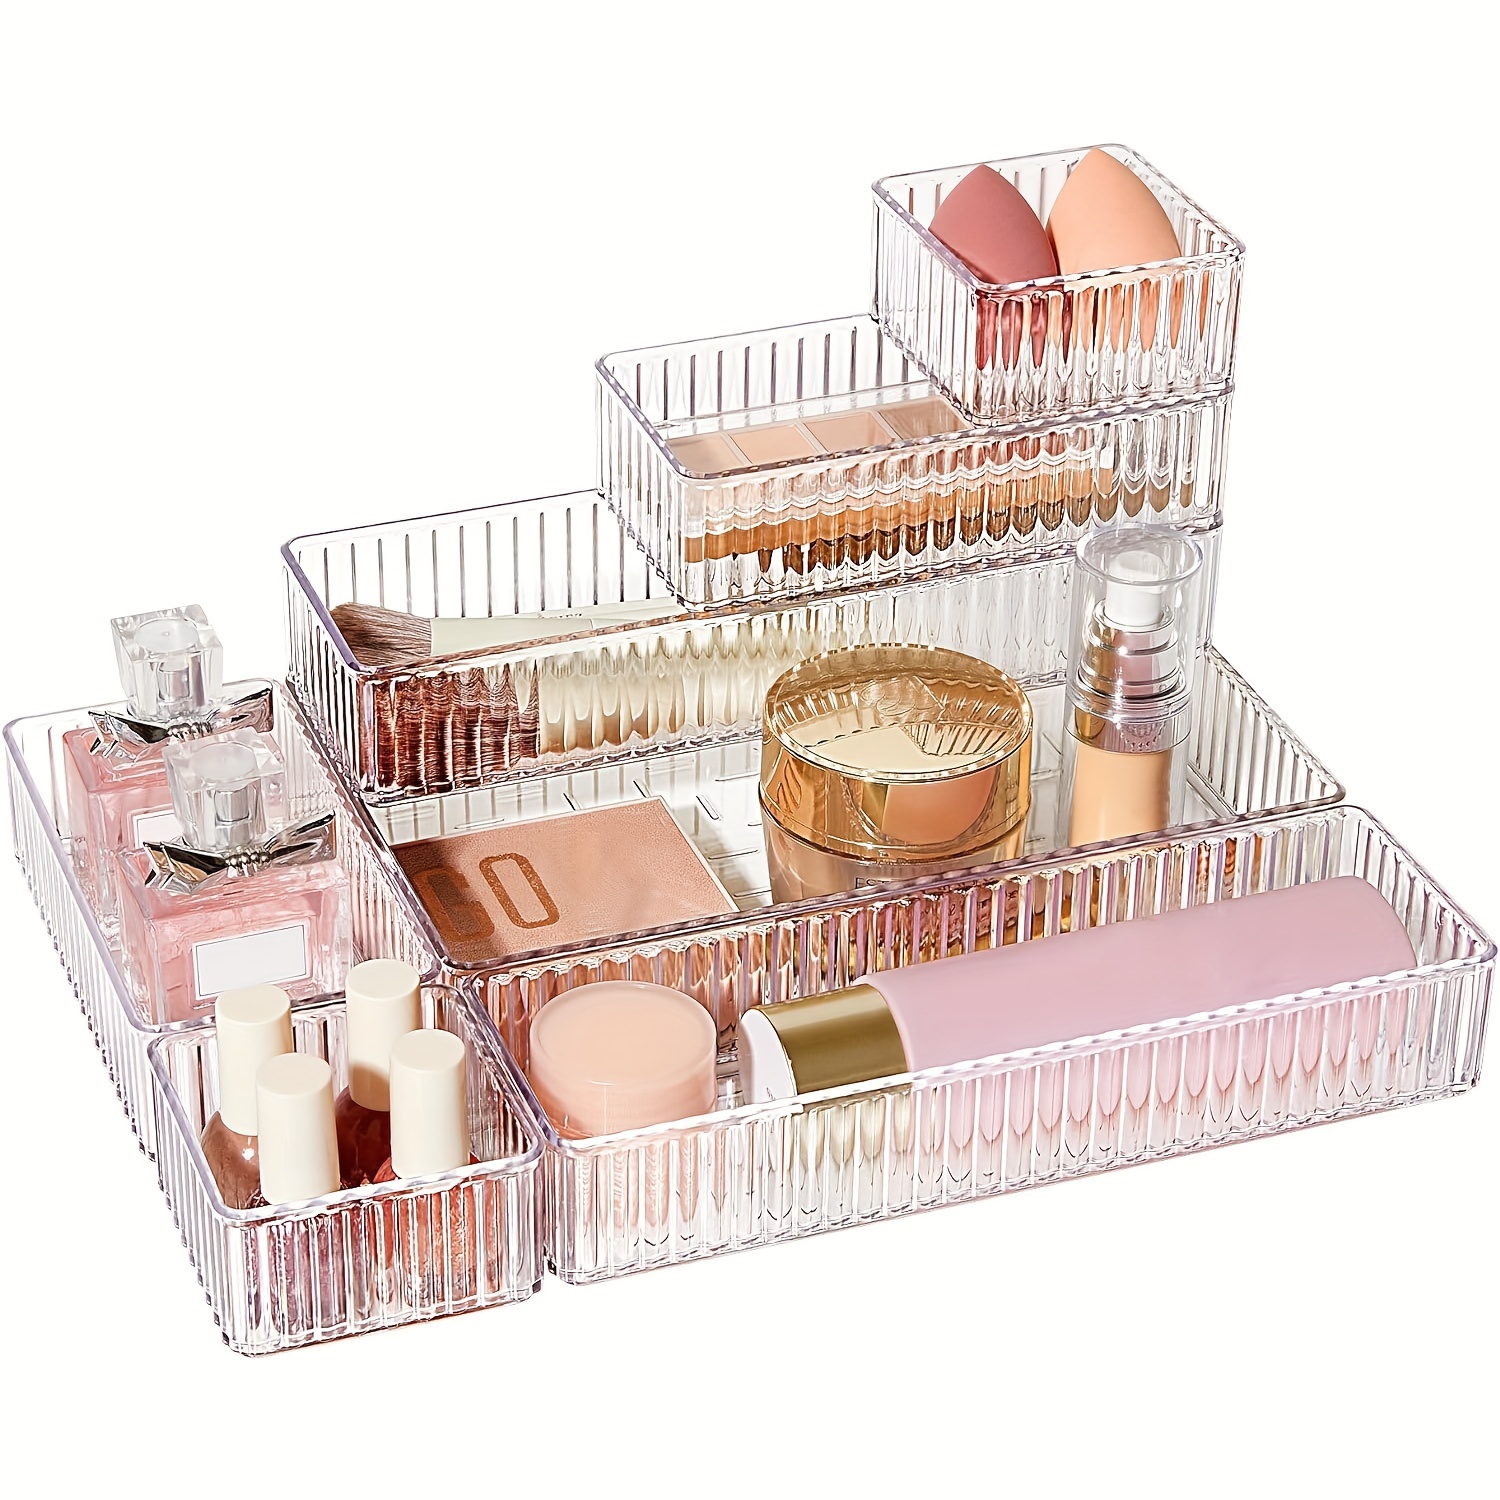 

7-piece Clear Acrylic Drawer Organizer Set - Stackable Storage Trays In 4 Sizes For Makeup, Dresser, Bathroom, Office Supplies & Kitchen Gadgets Drawer Organizer Trays Desk Drawer Organizer Tray